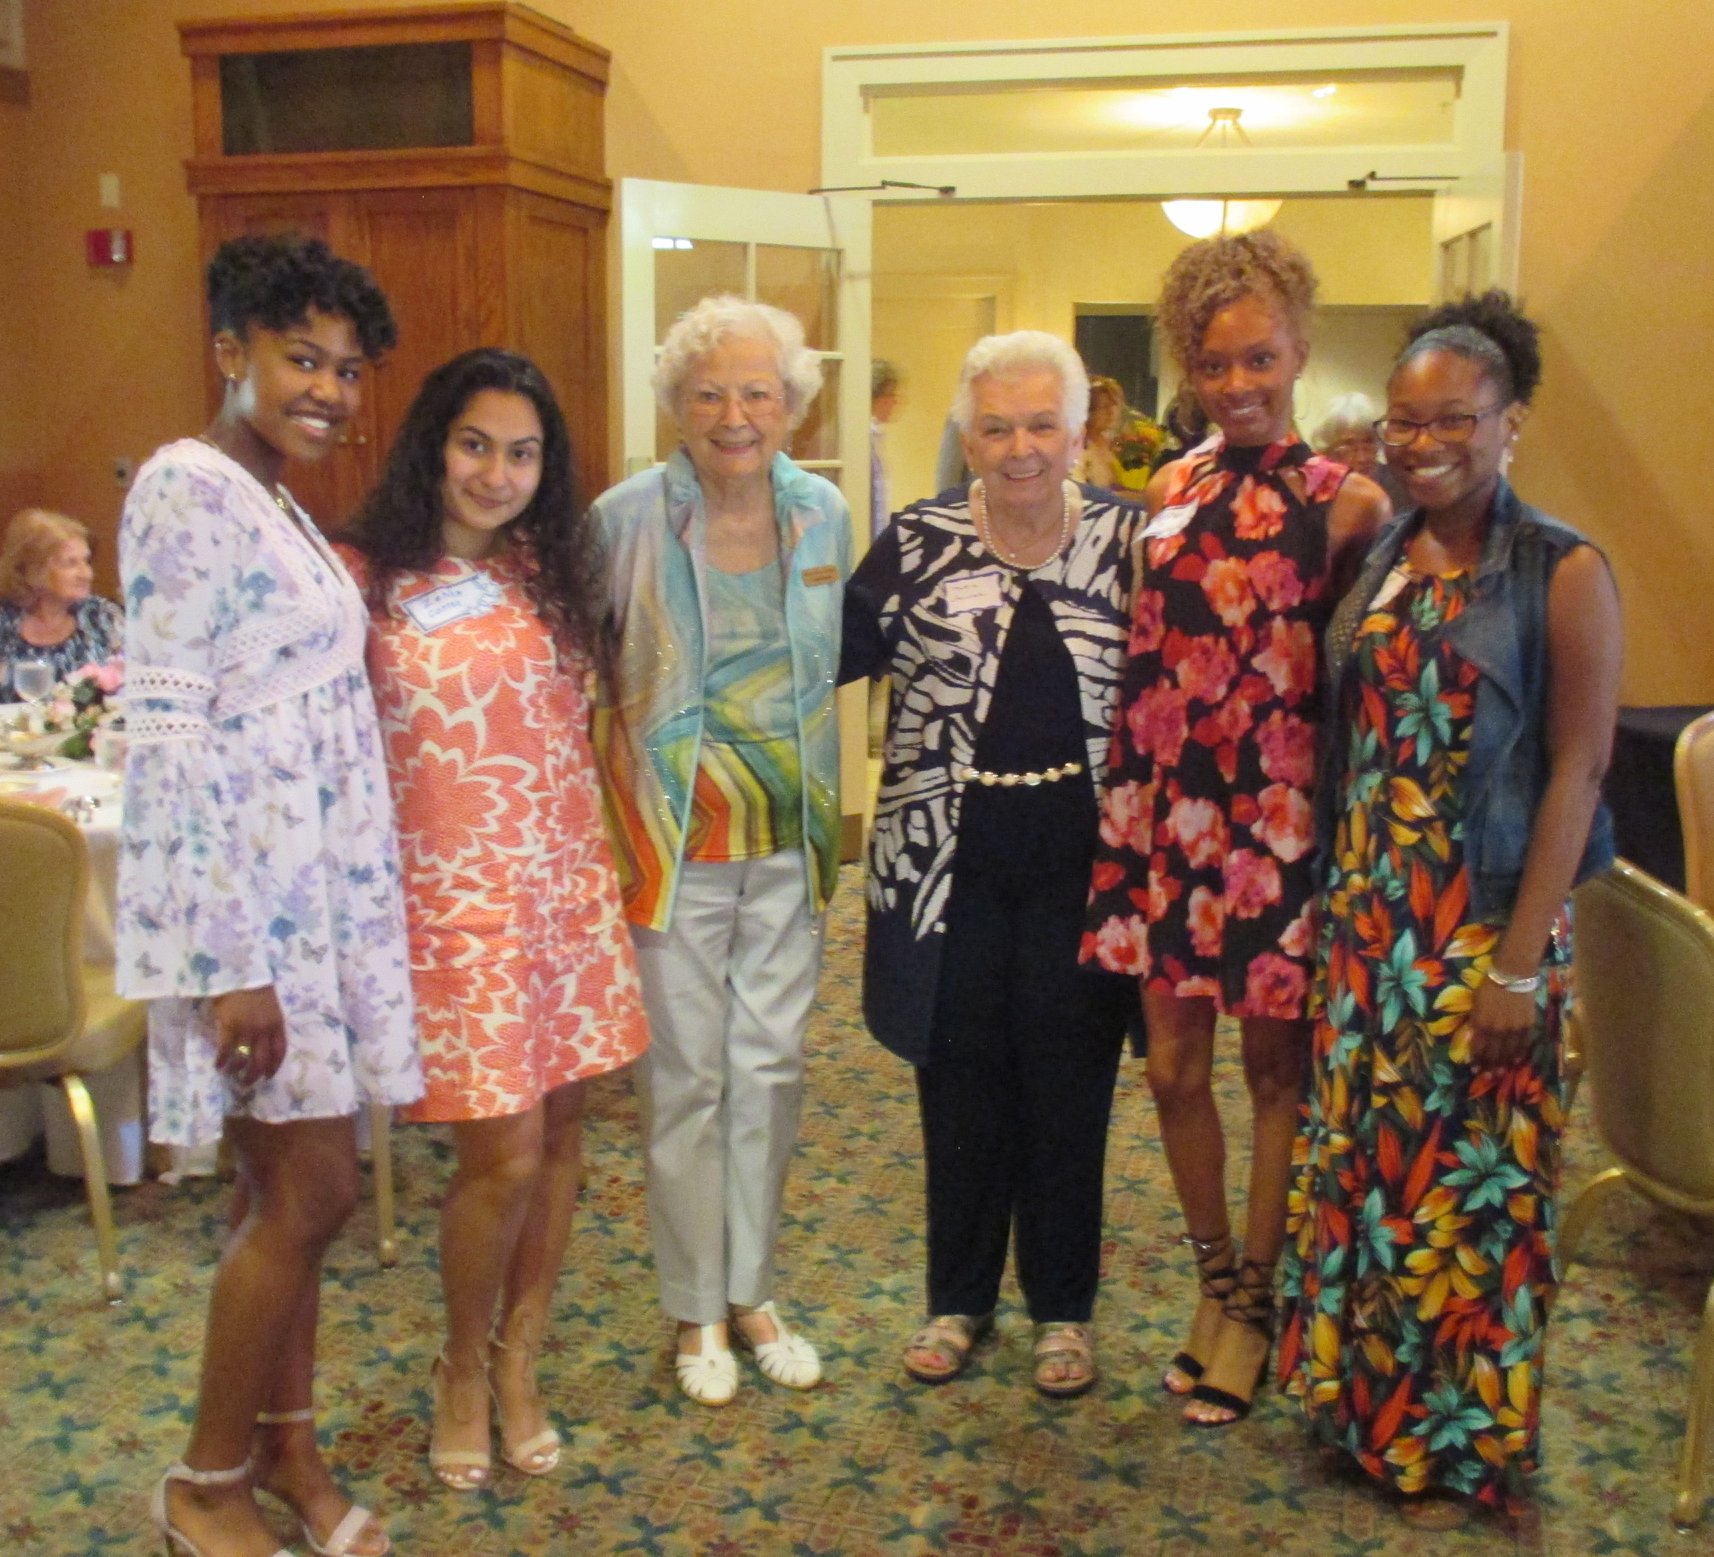 The Woman’s Club of Jacksonville, Inc